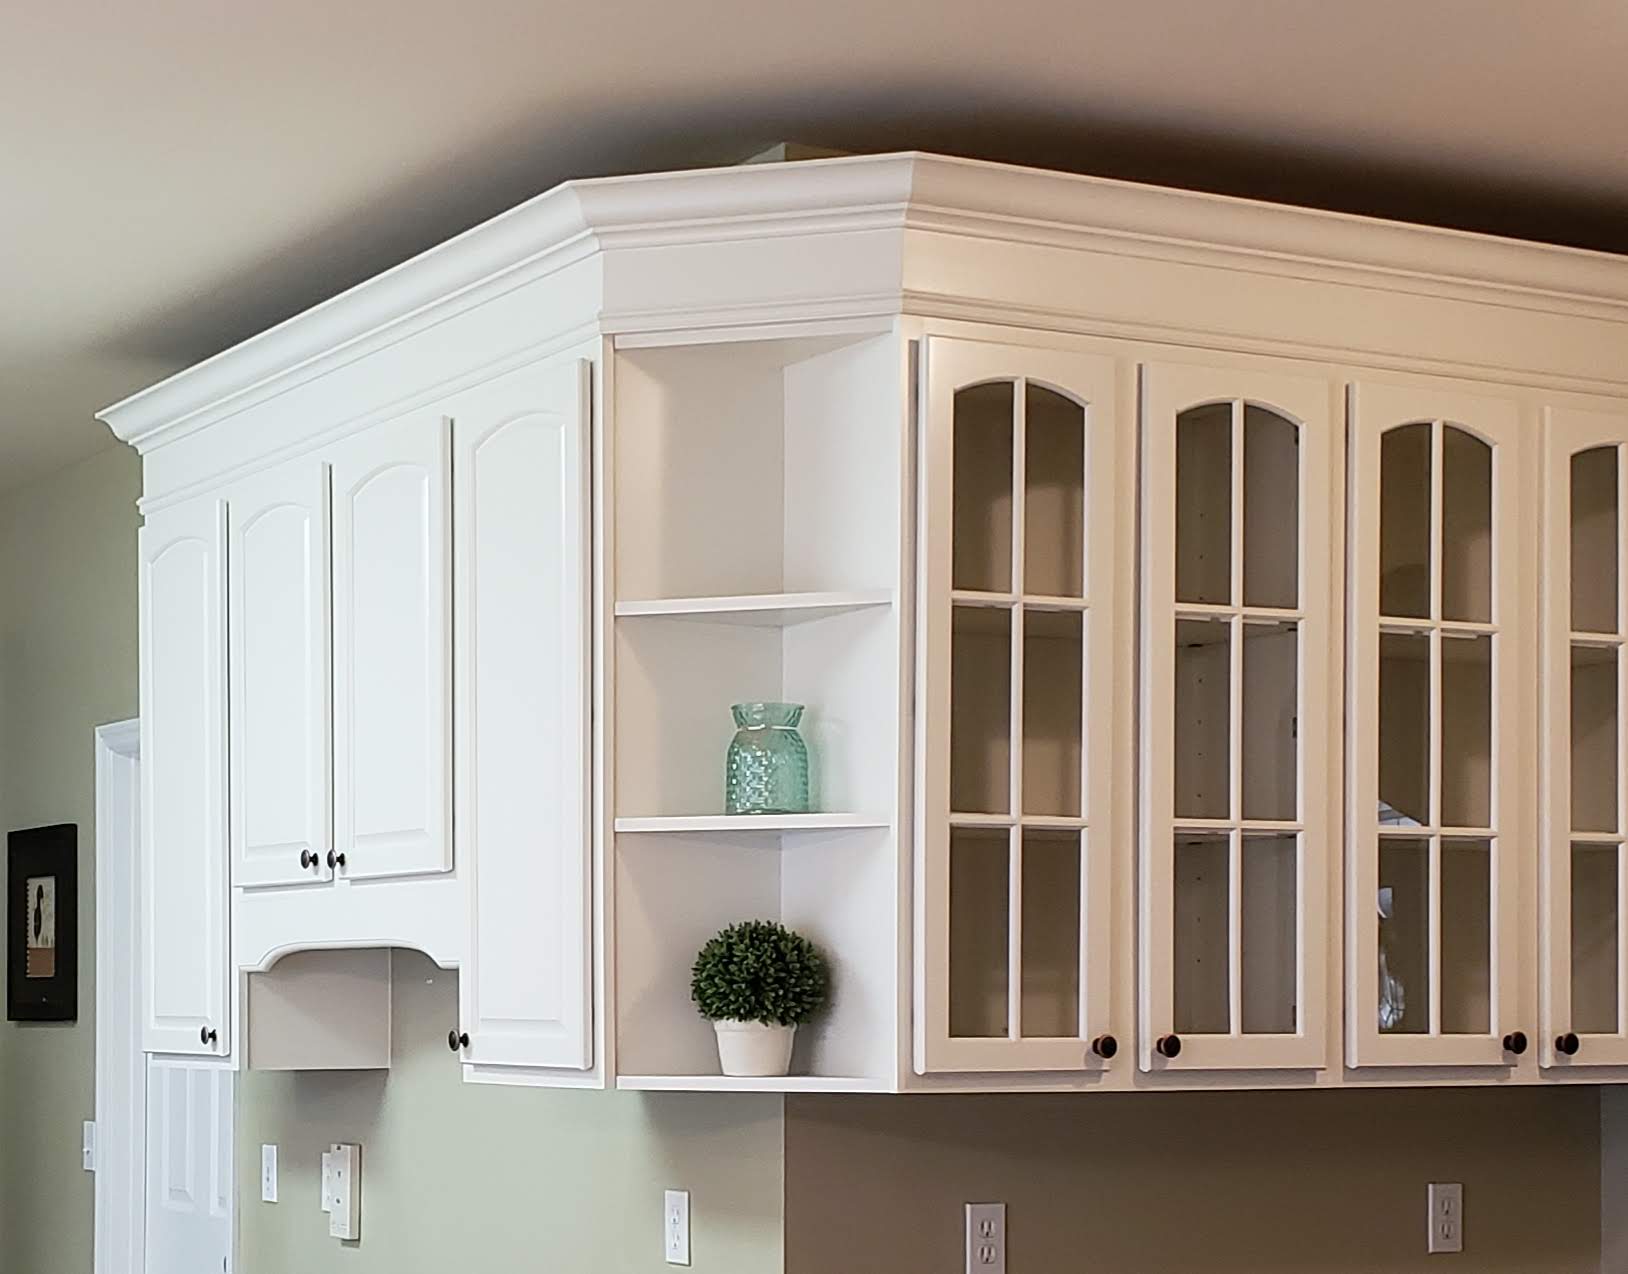 scribe molding on upper cabinets